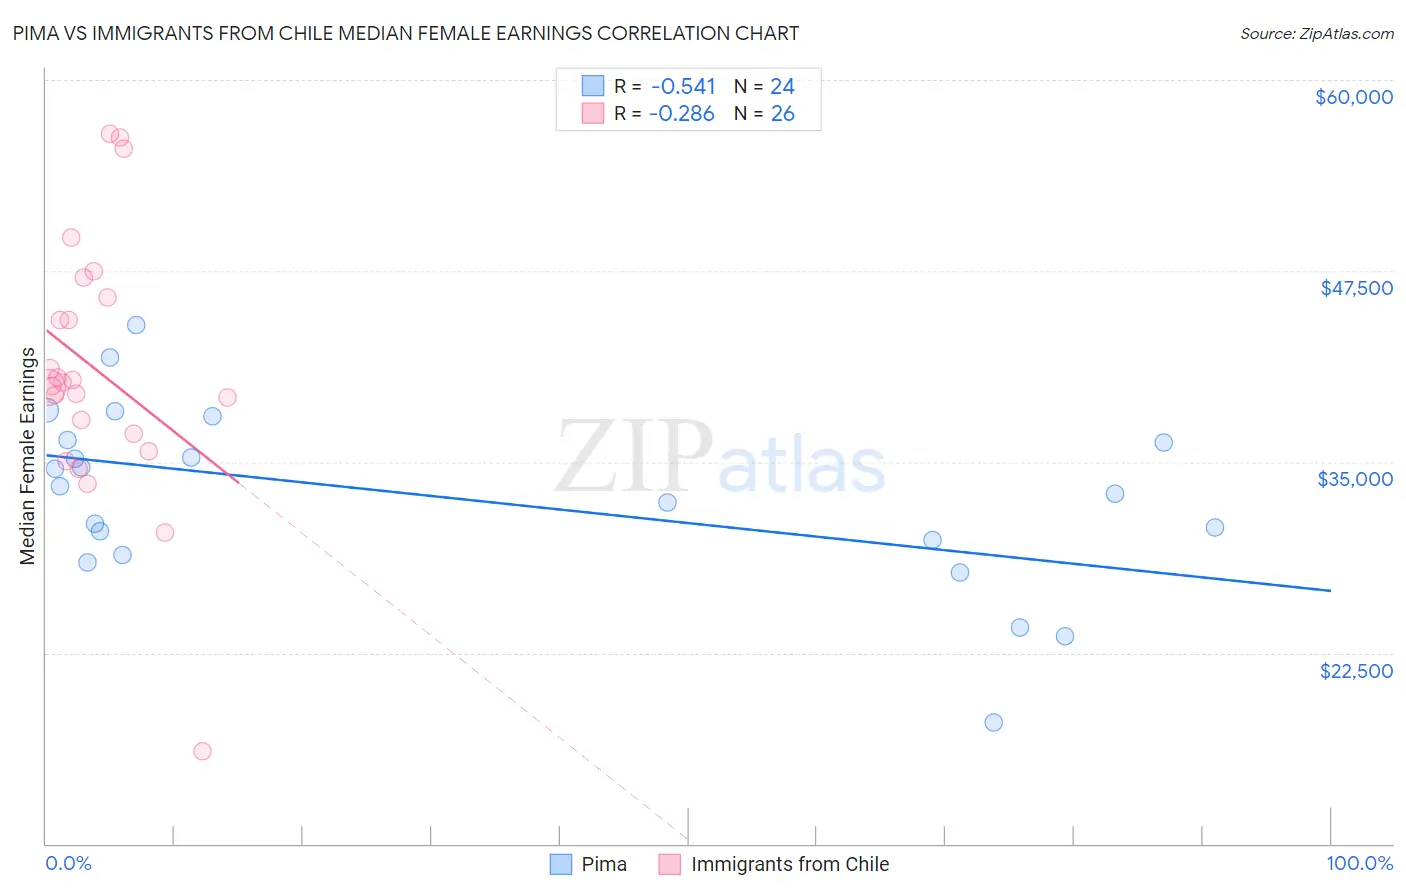 Pima vs Immigrants from Chile Median Female Earnings